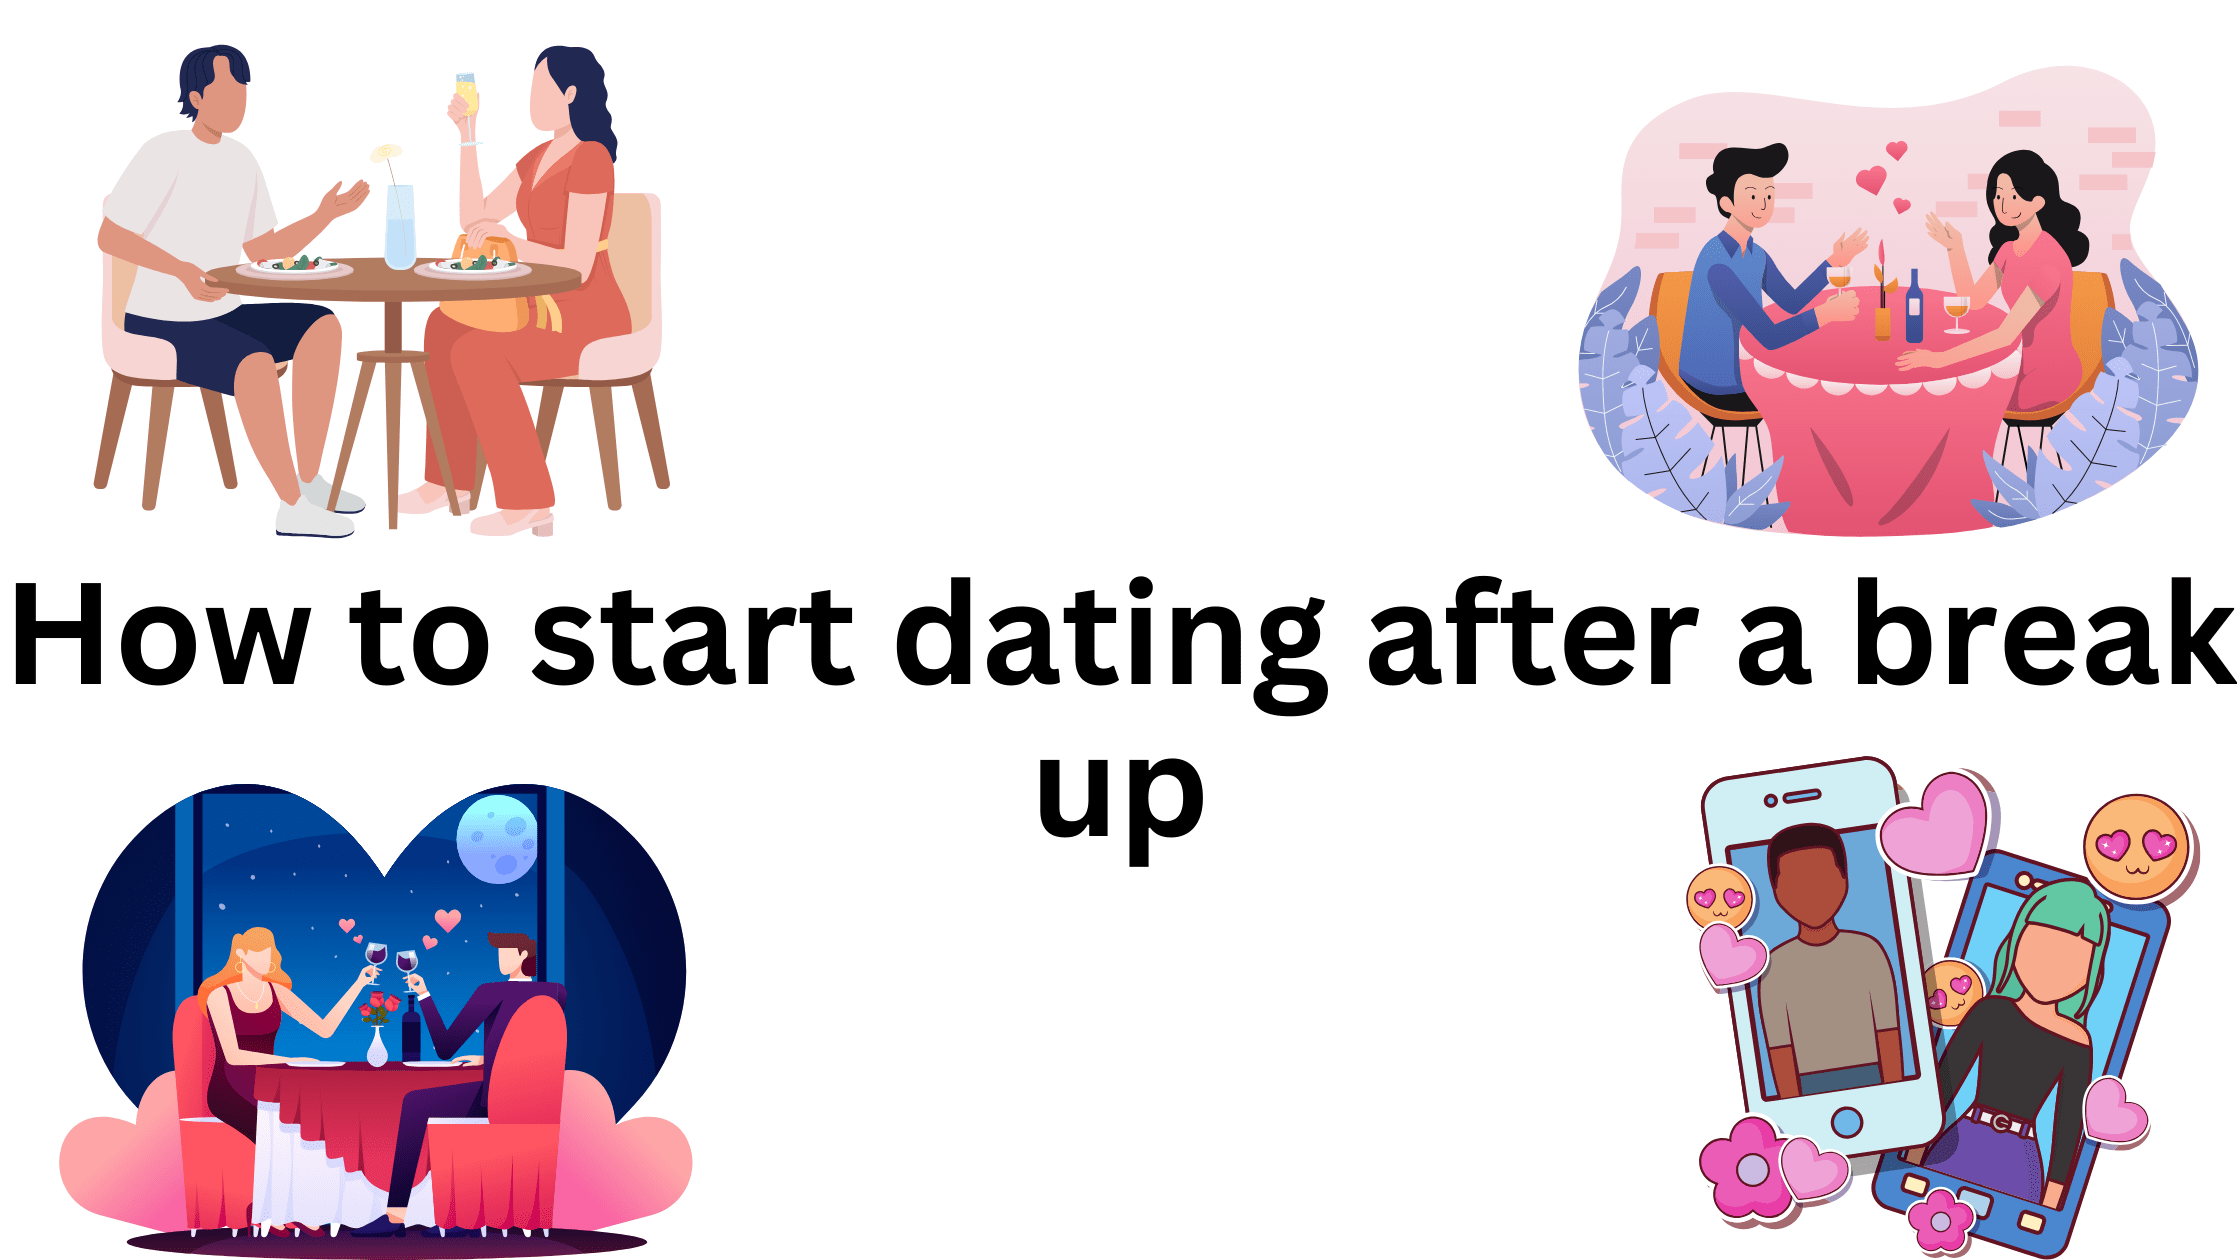 10 Great Ways to Start Dating After a Break Up 5